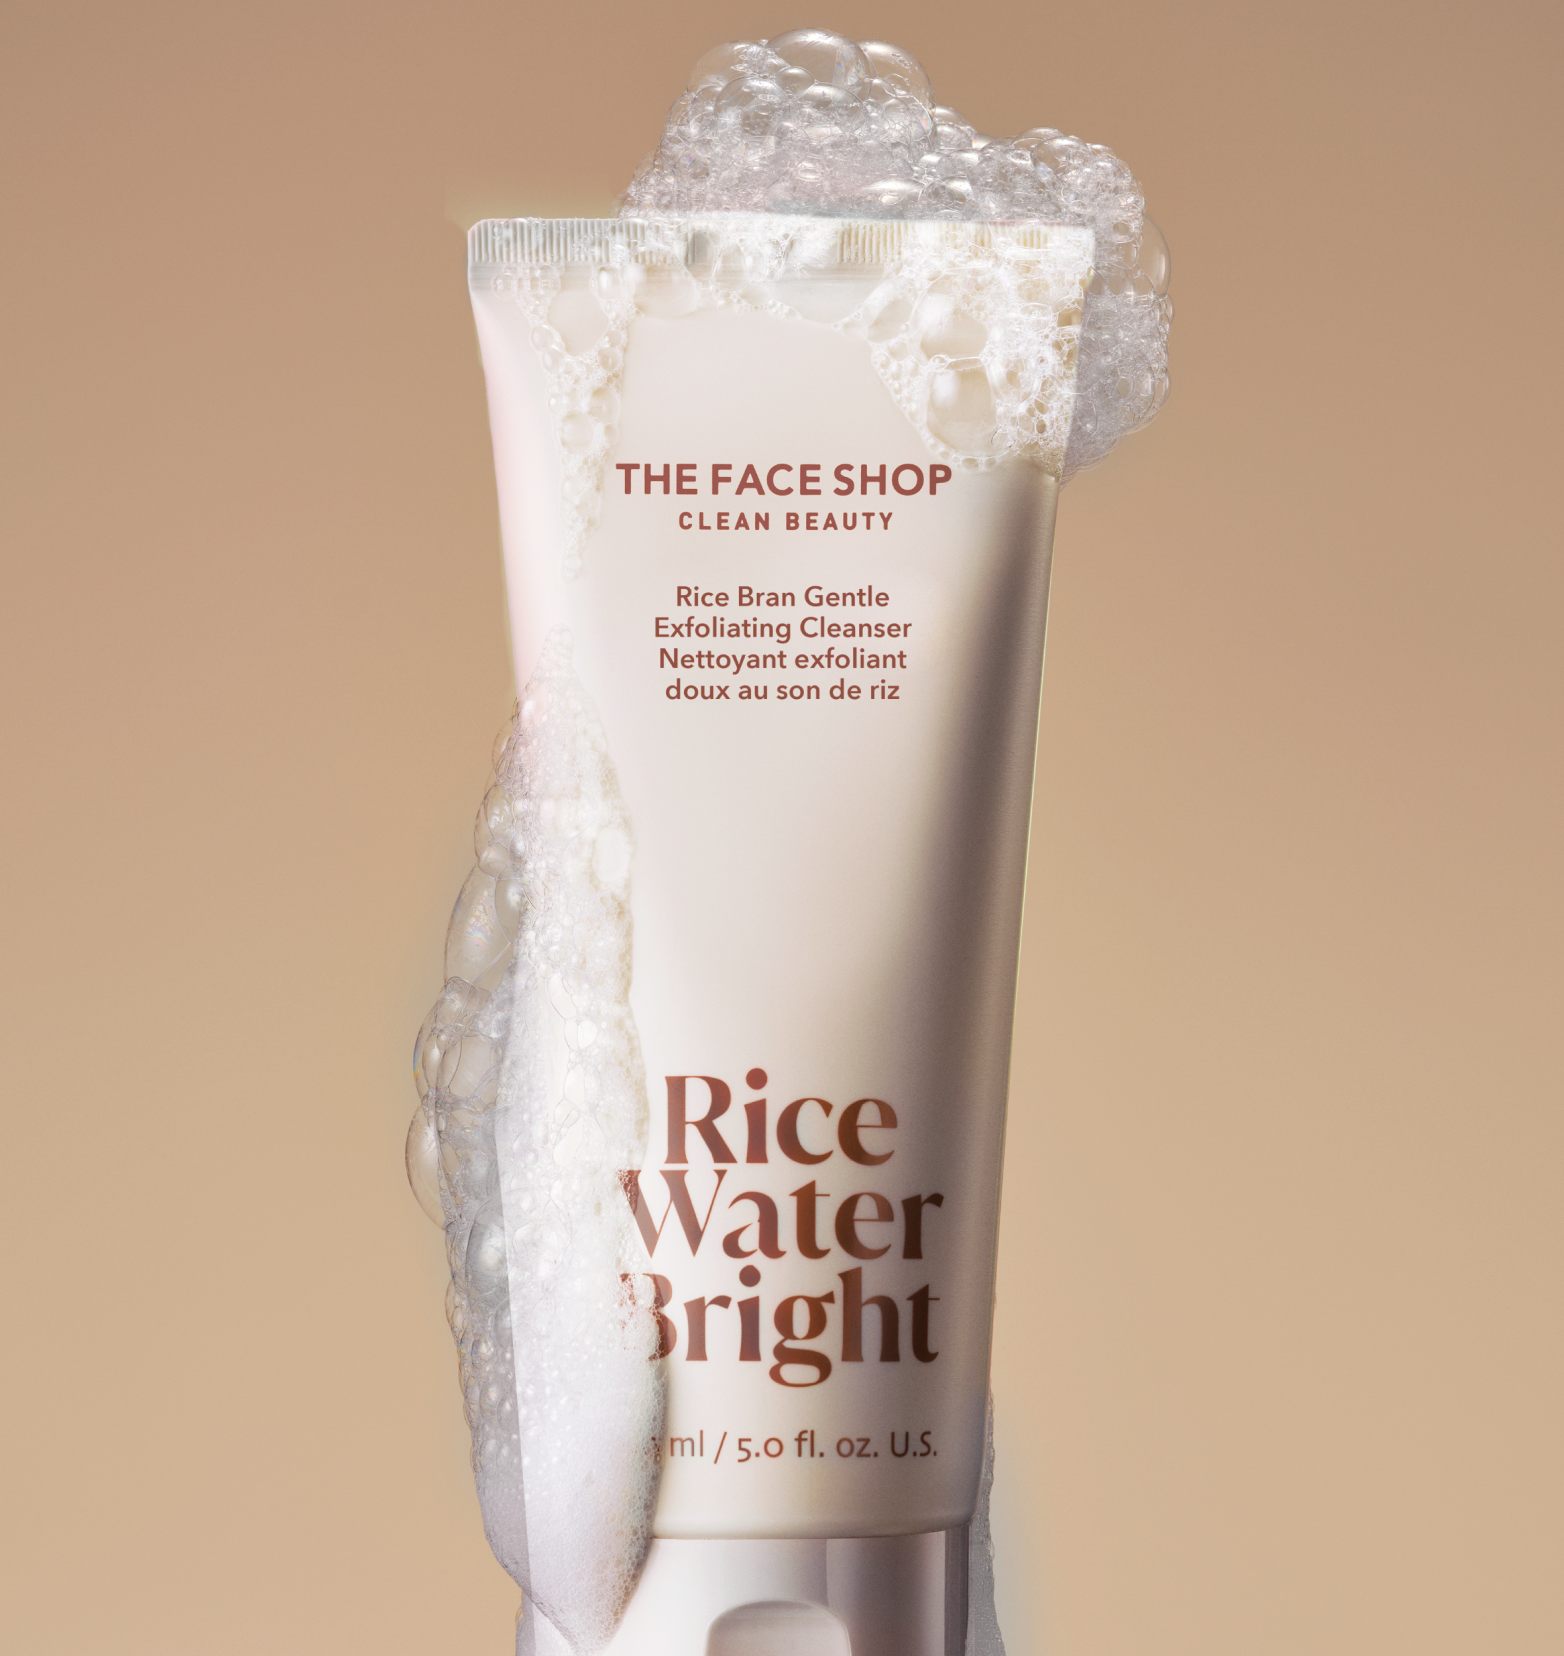 A tube of Rice Water Bright Rice Bran Gentle Exfoliating Cleanser covered in bubbles on a beige background.